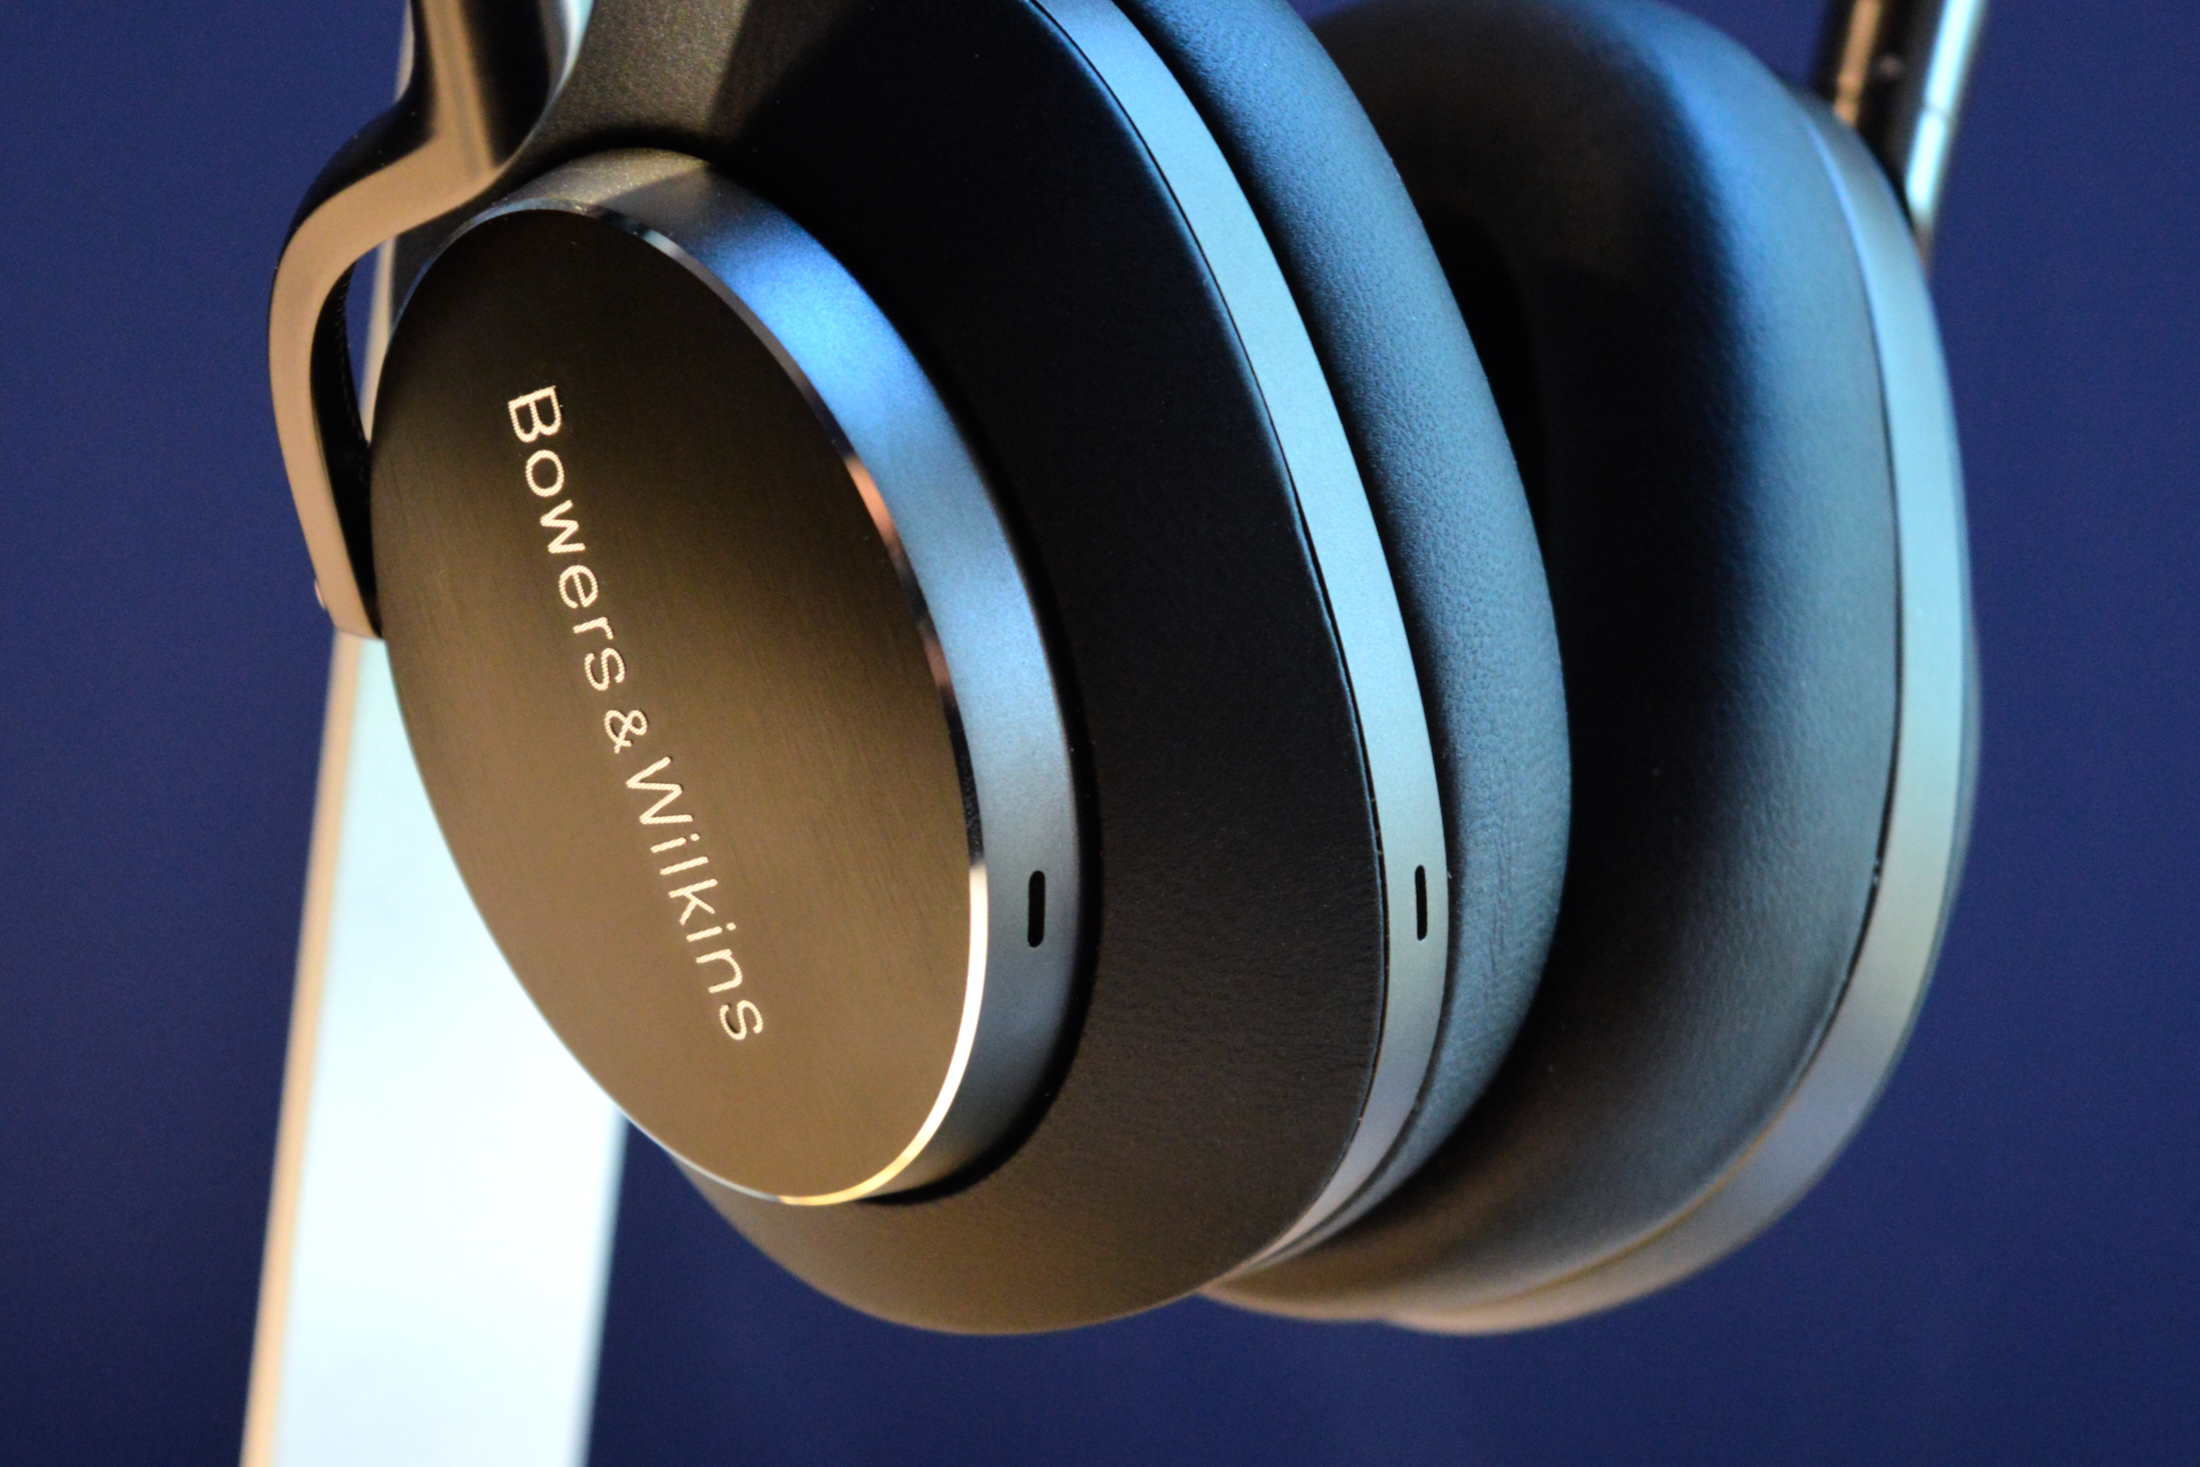 Bowers & Wilkins Px8 Over-Ear Wireless Noise Cancelling Headphones